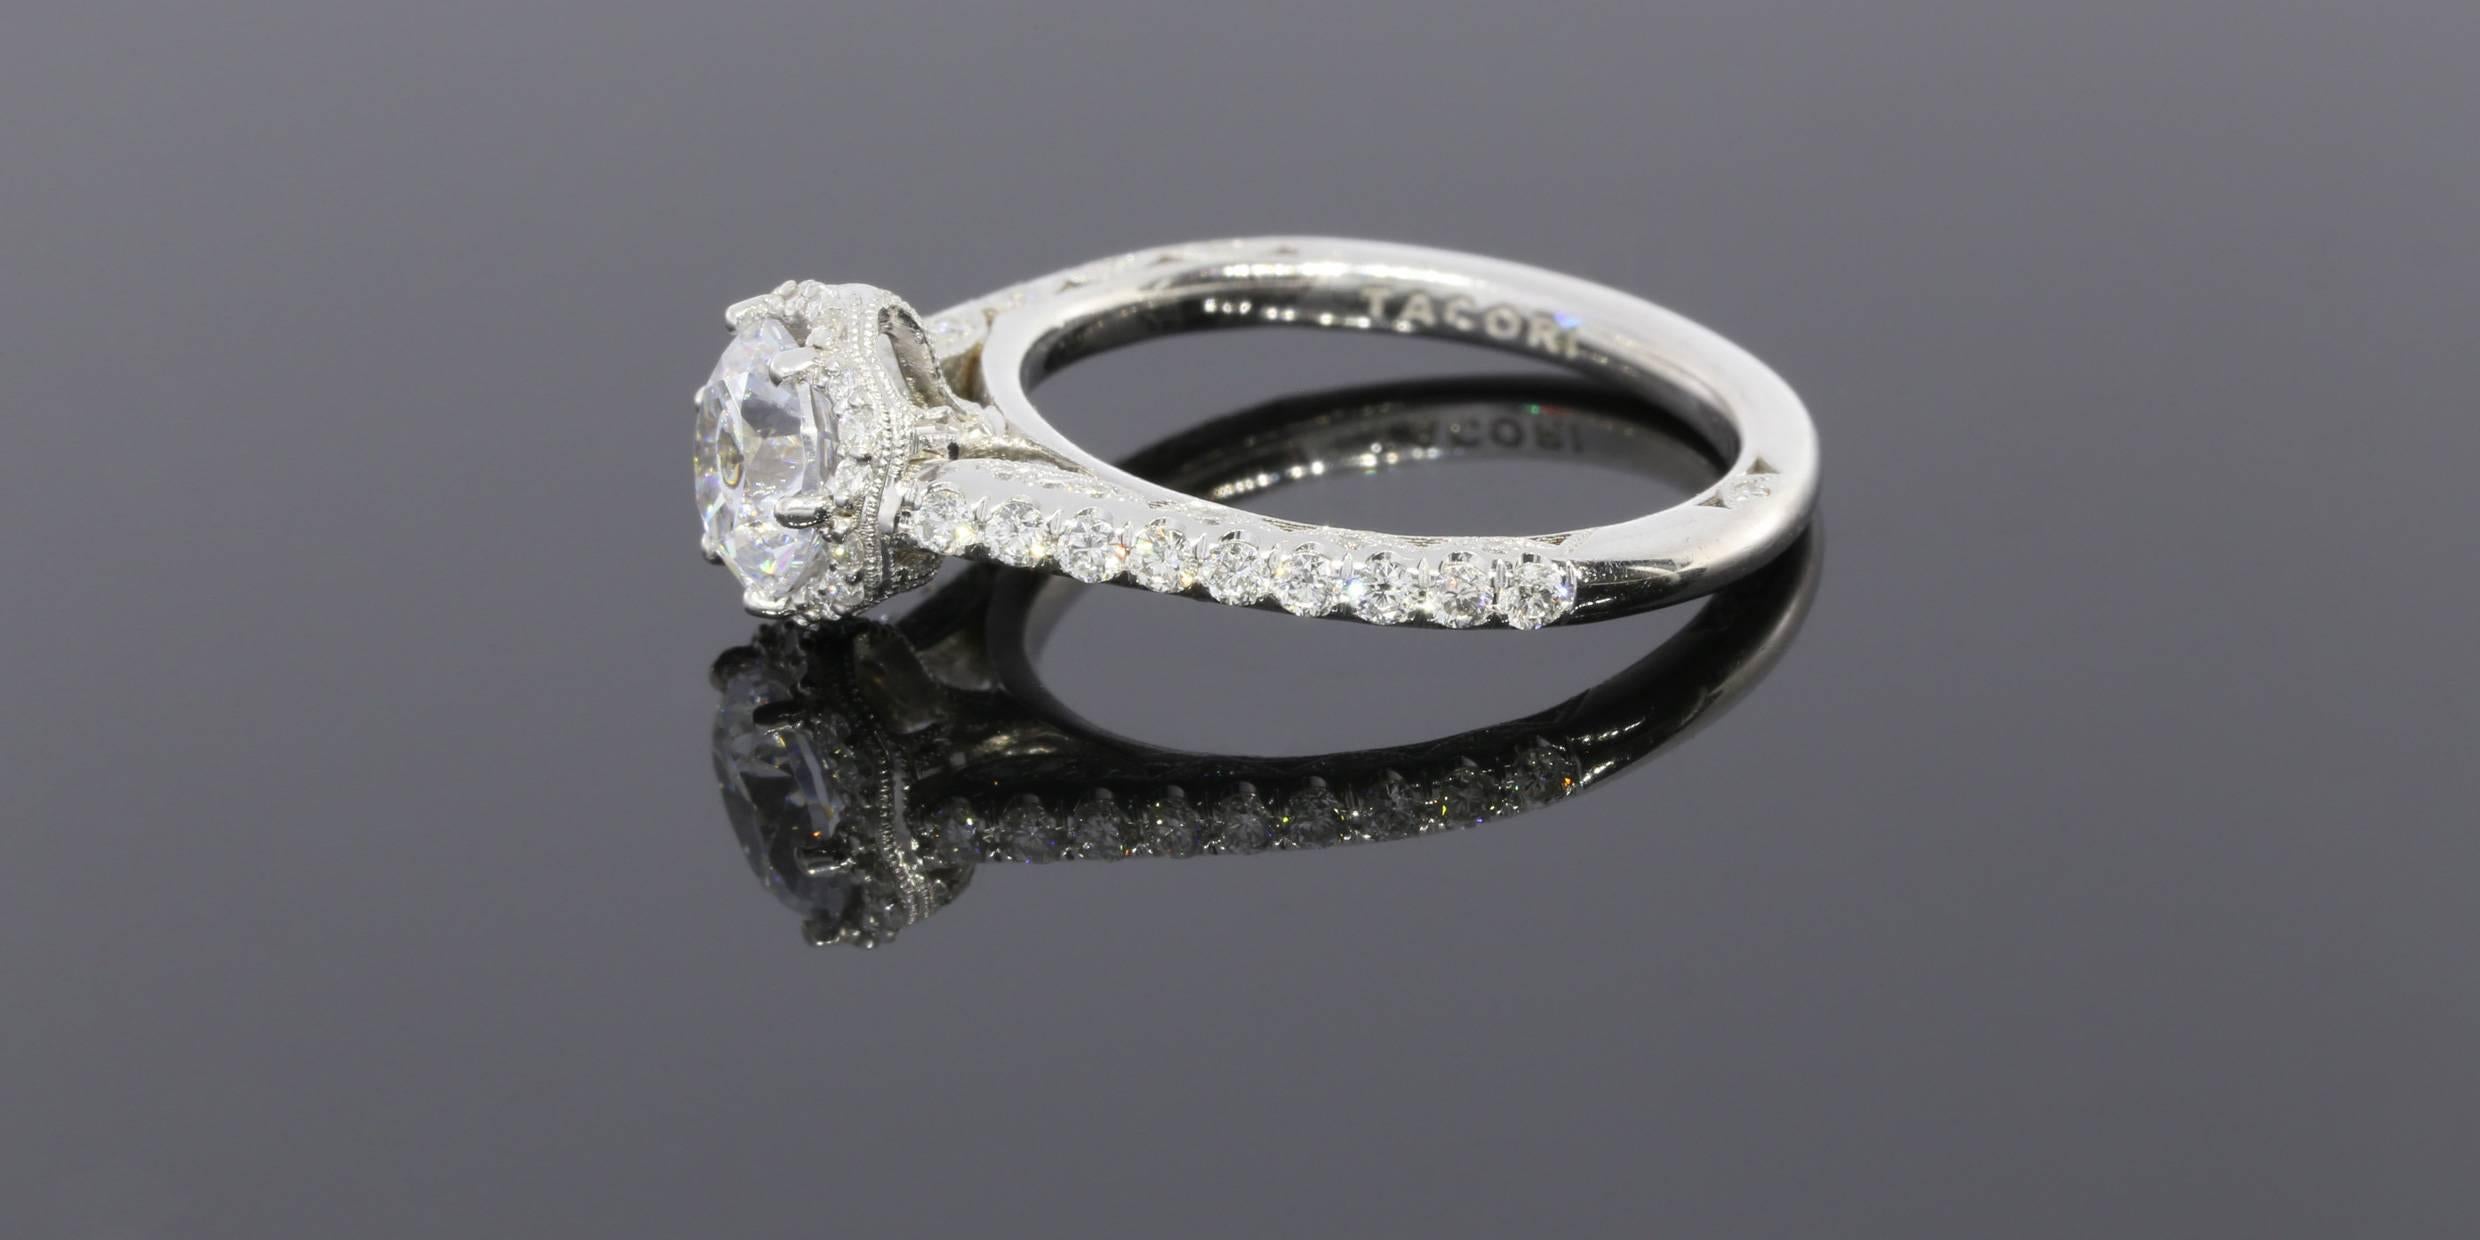 This gorgeous engagement ring is from the elite designer Tacori. Tacori is known for creating some of the most desired rings in the world. Their quality of craftsmanship is stunning, & their intricate engravings & detailed designs are breath taking,